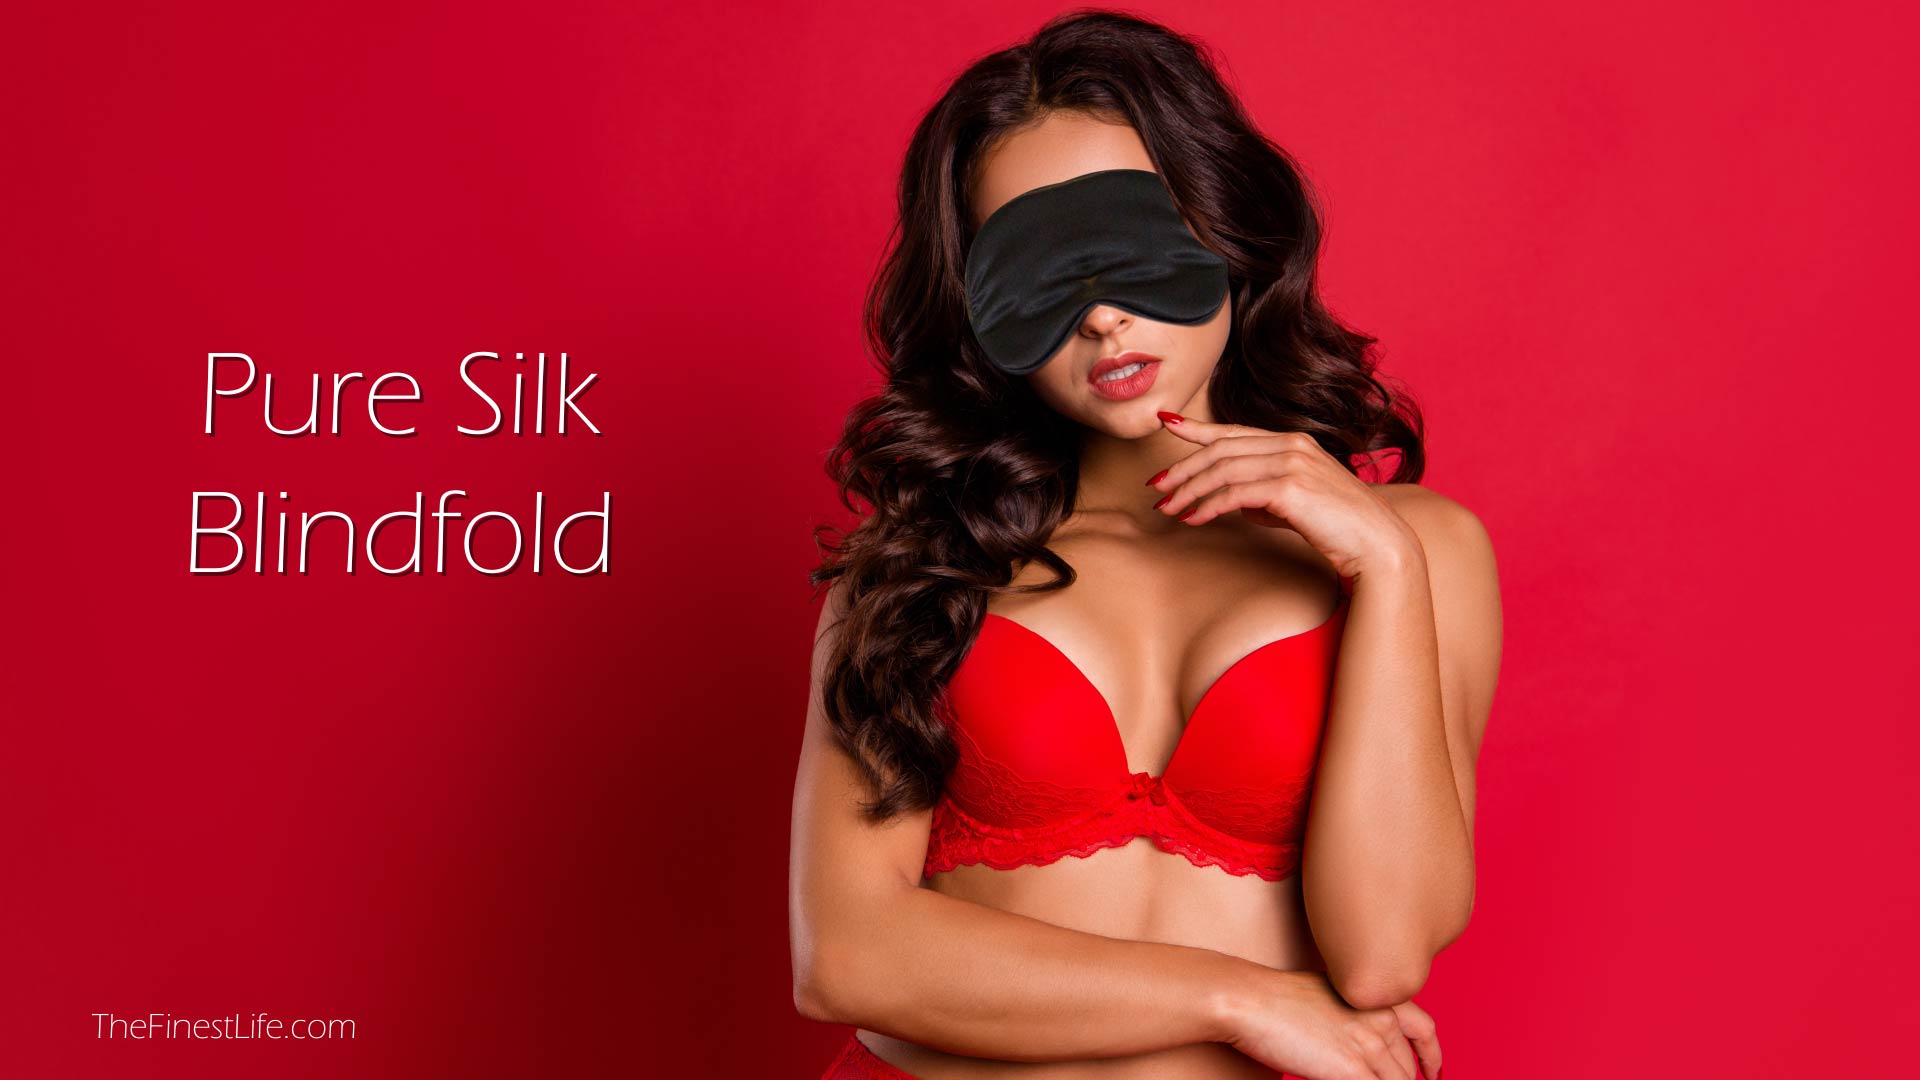 Pure Silk Blindfold by The Finest Life 6-15-2020